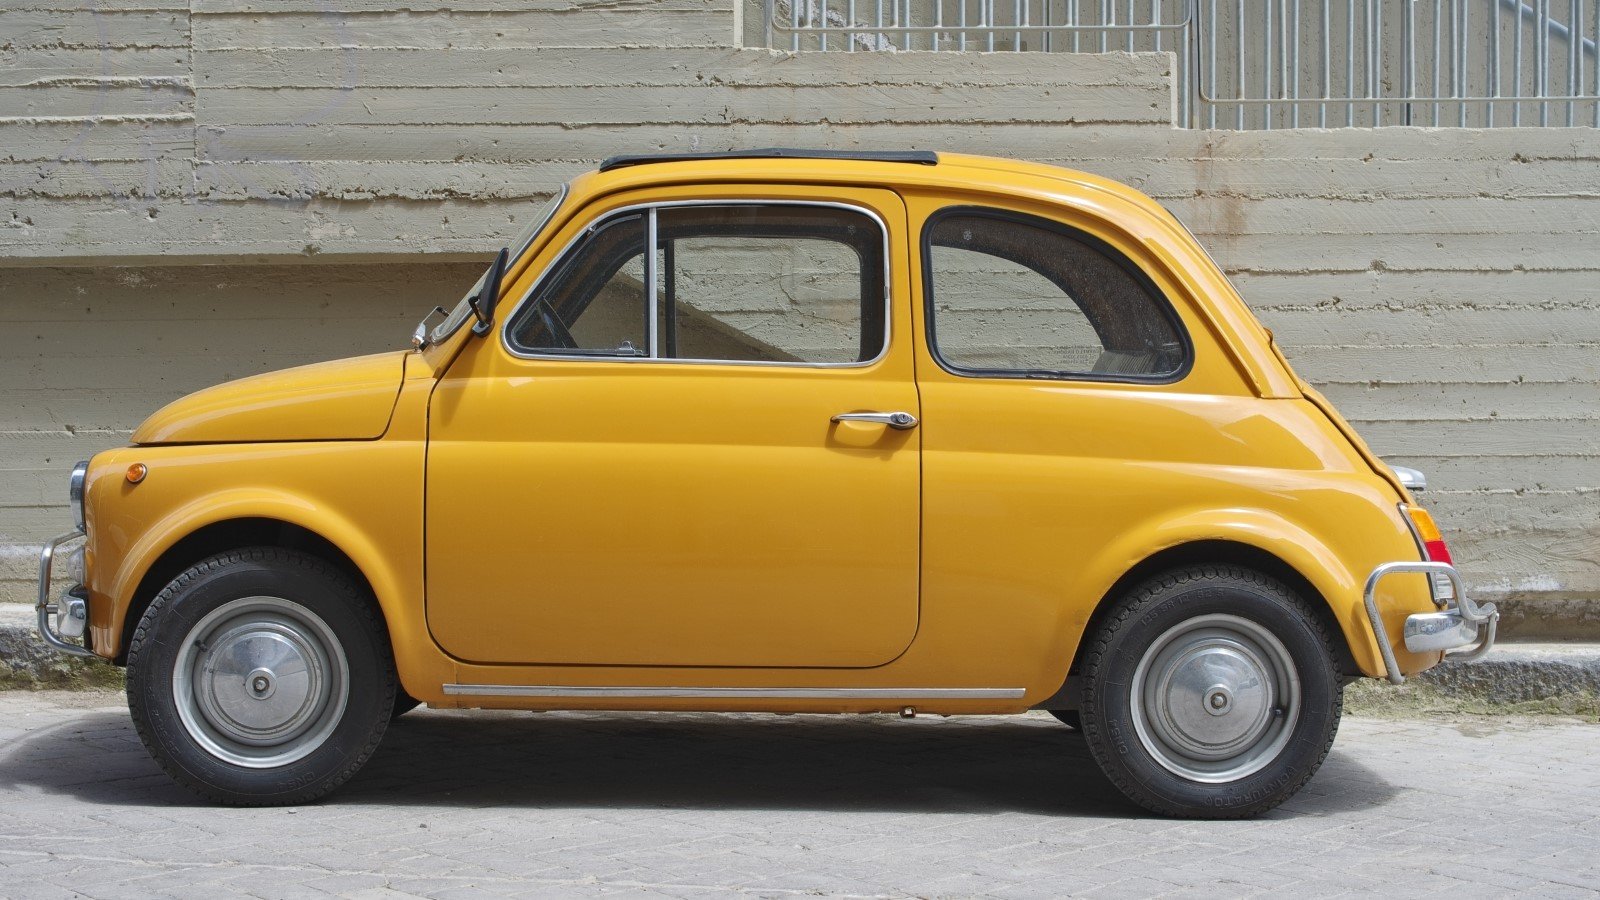 <p>The <strong>Fiat 500</strong> is a compact and stylish city car known for its European charm. Despite its adorable appearance, it’s known to have engine issues, specifically oil leaks.</p>